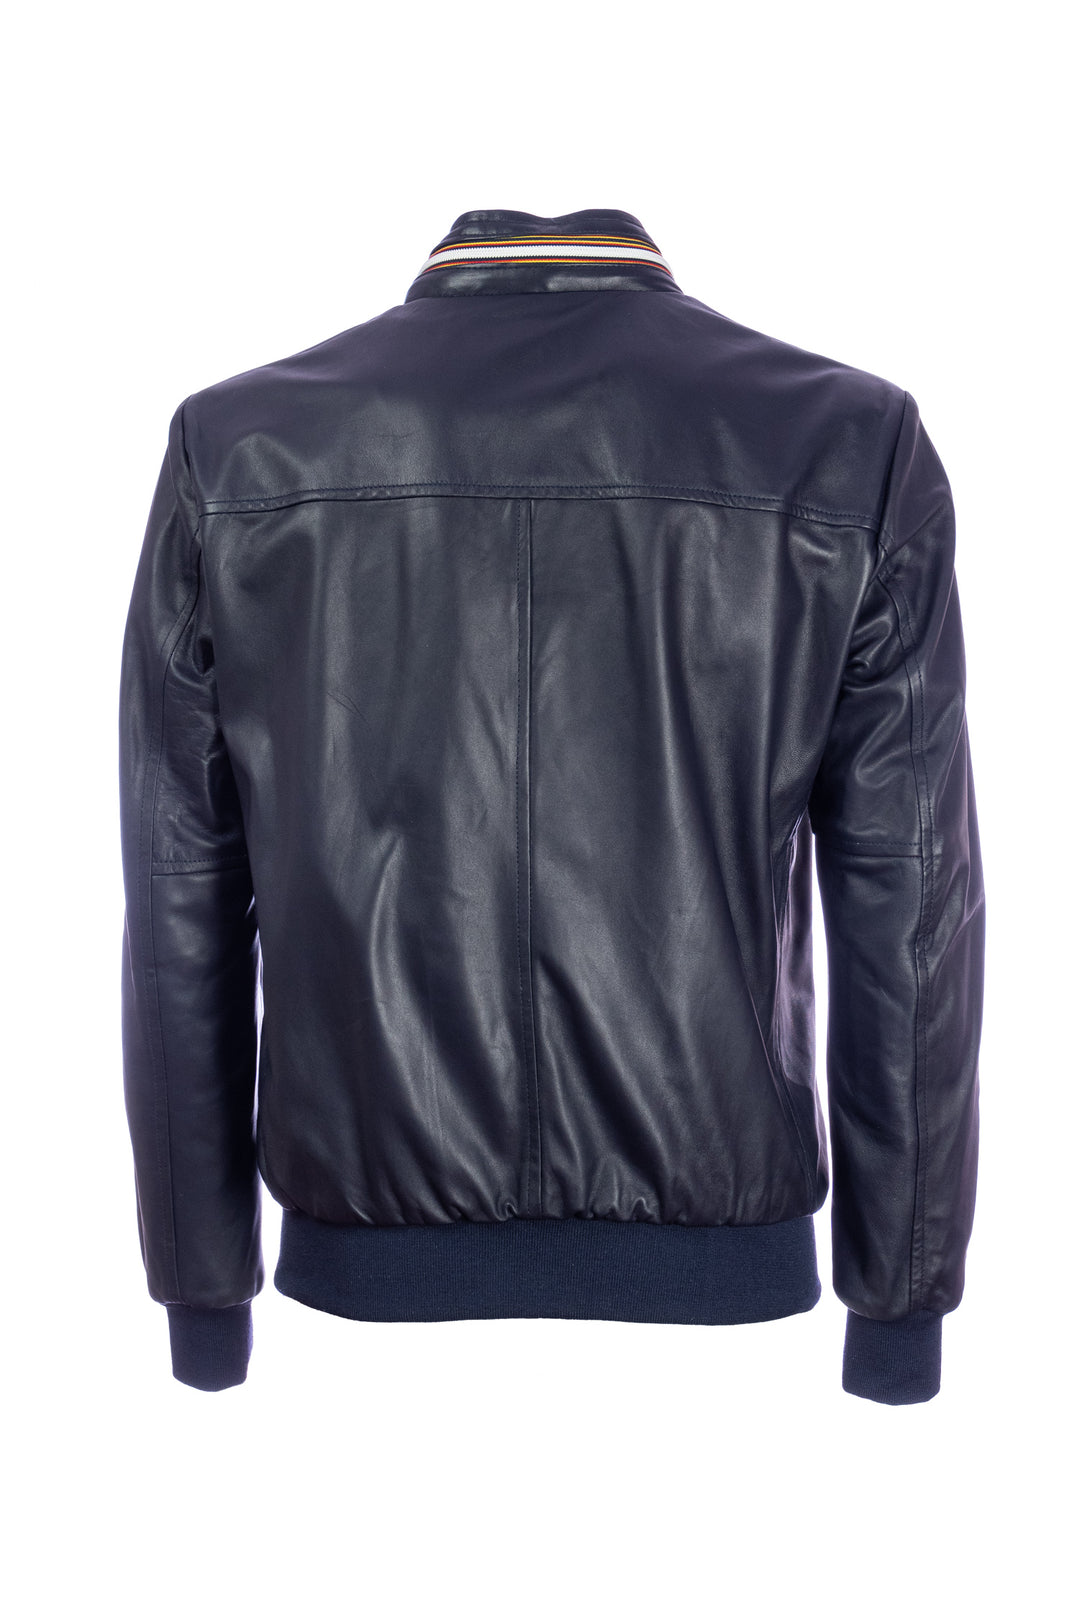 SOMETHING SPECIAL Giacca bomber reversibile blu-biscotto in pelle - Mancinelli 1954